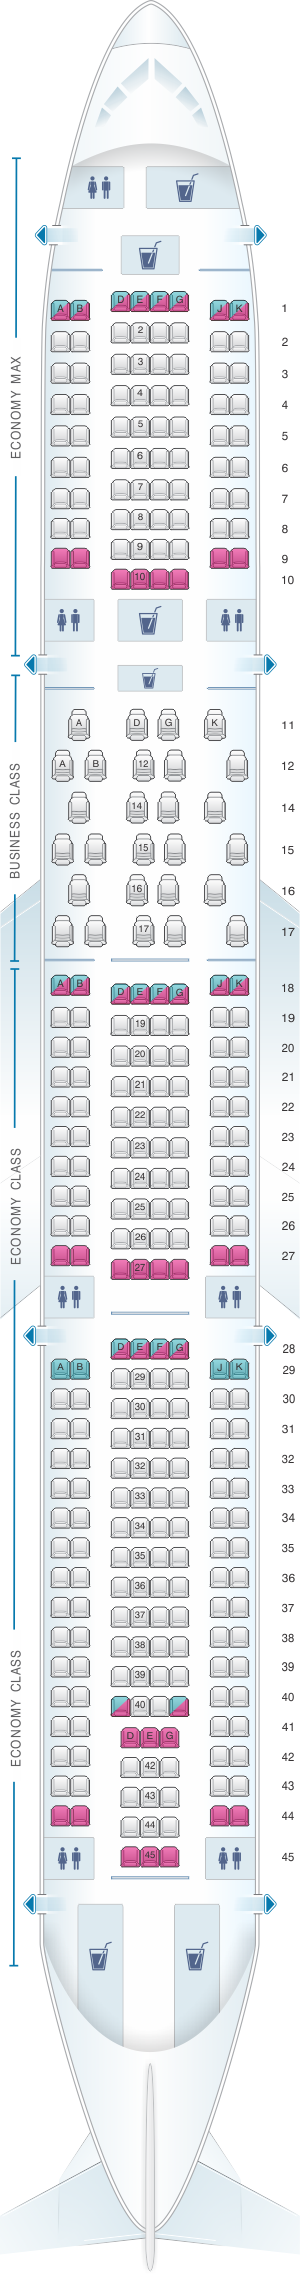 Seat map for Edelweiss Air Airbus A340 313